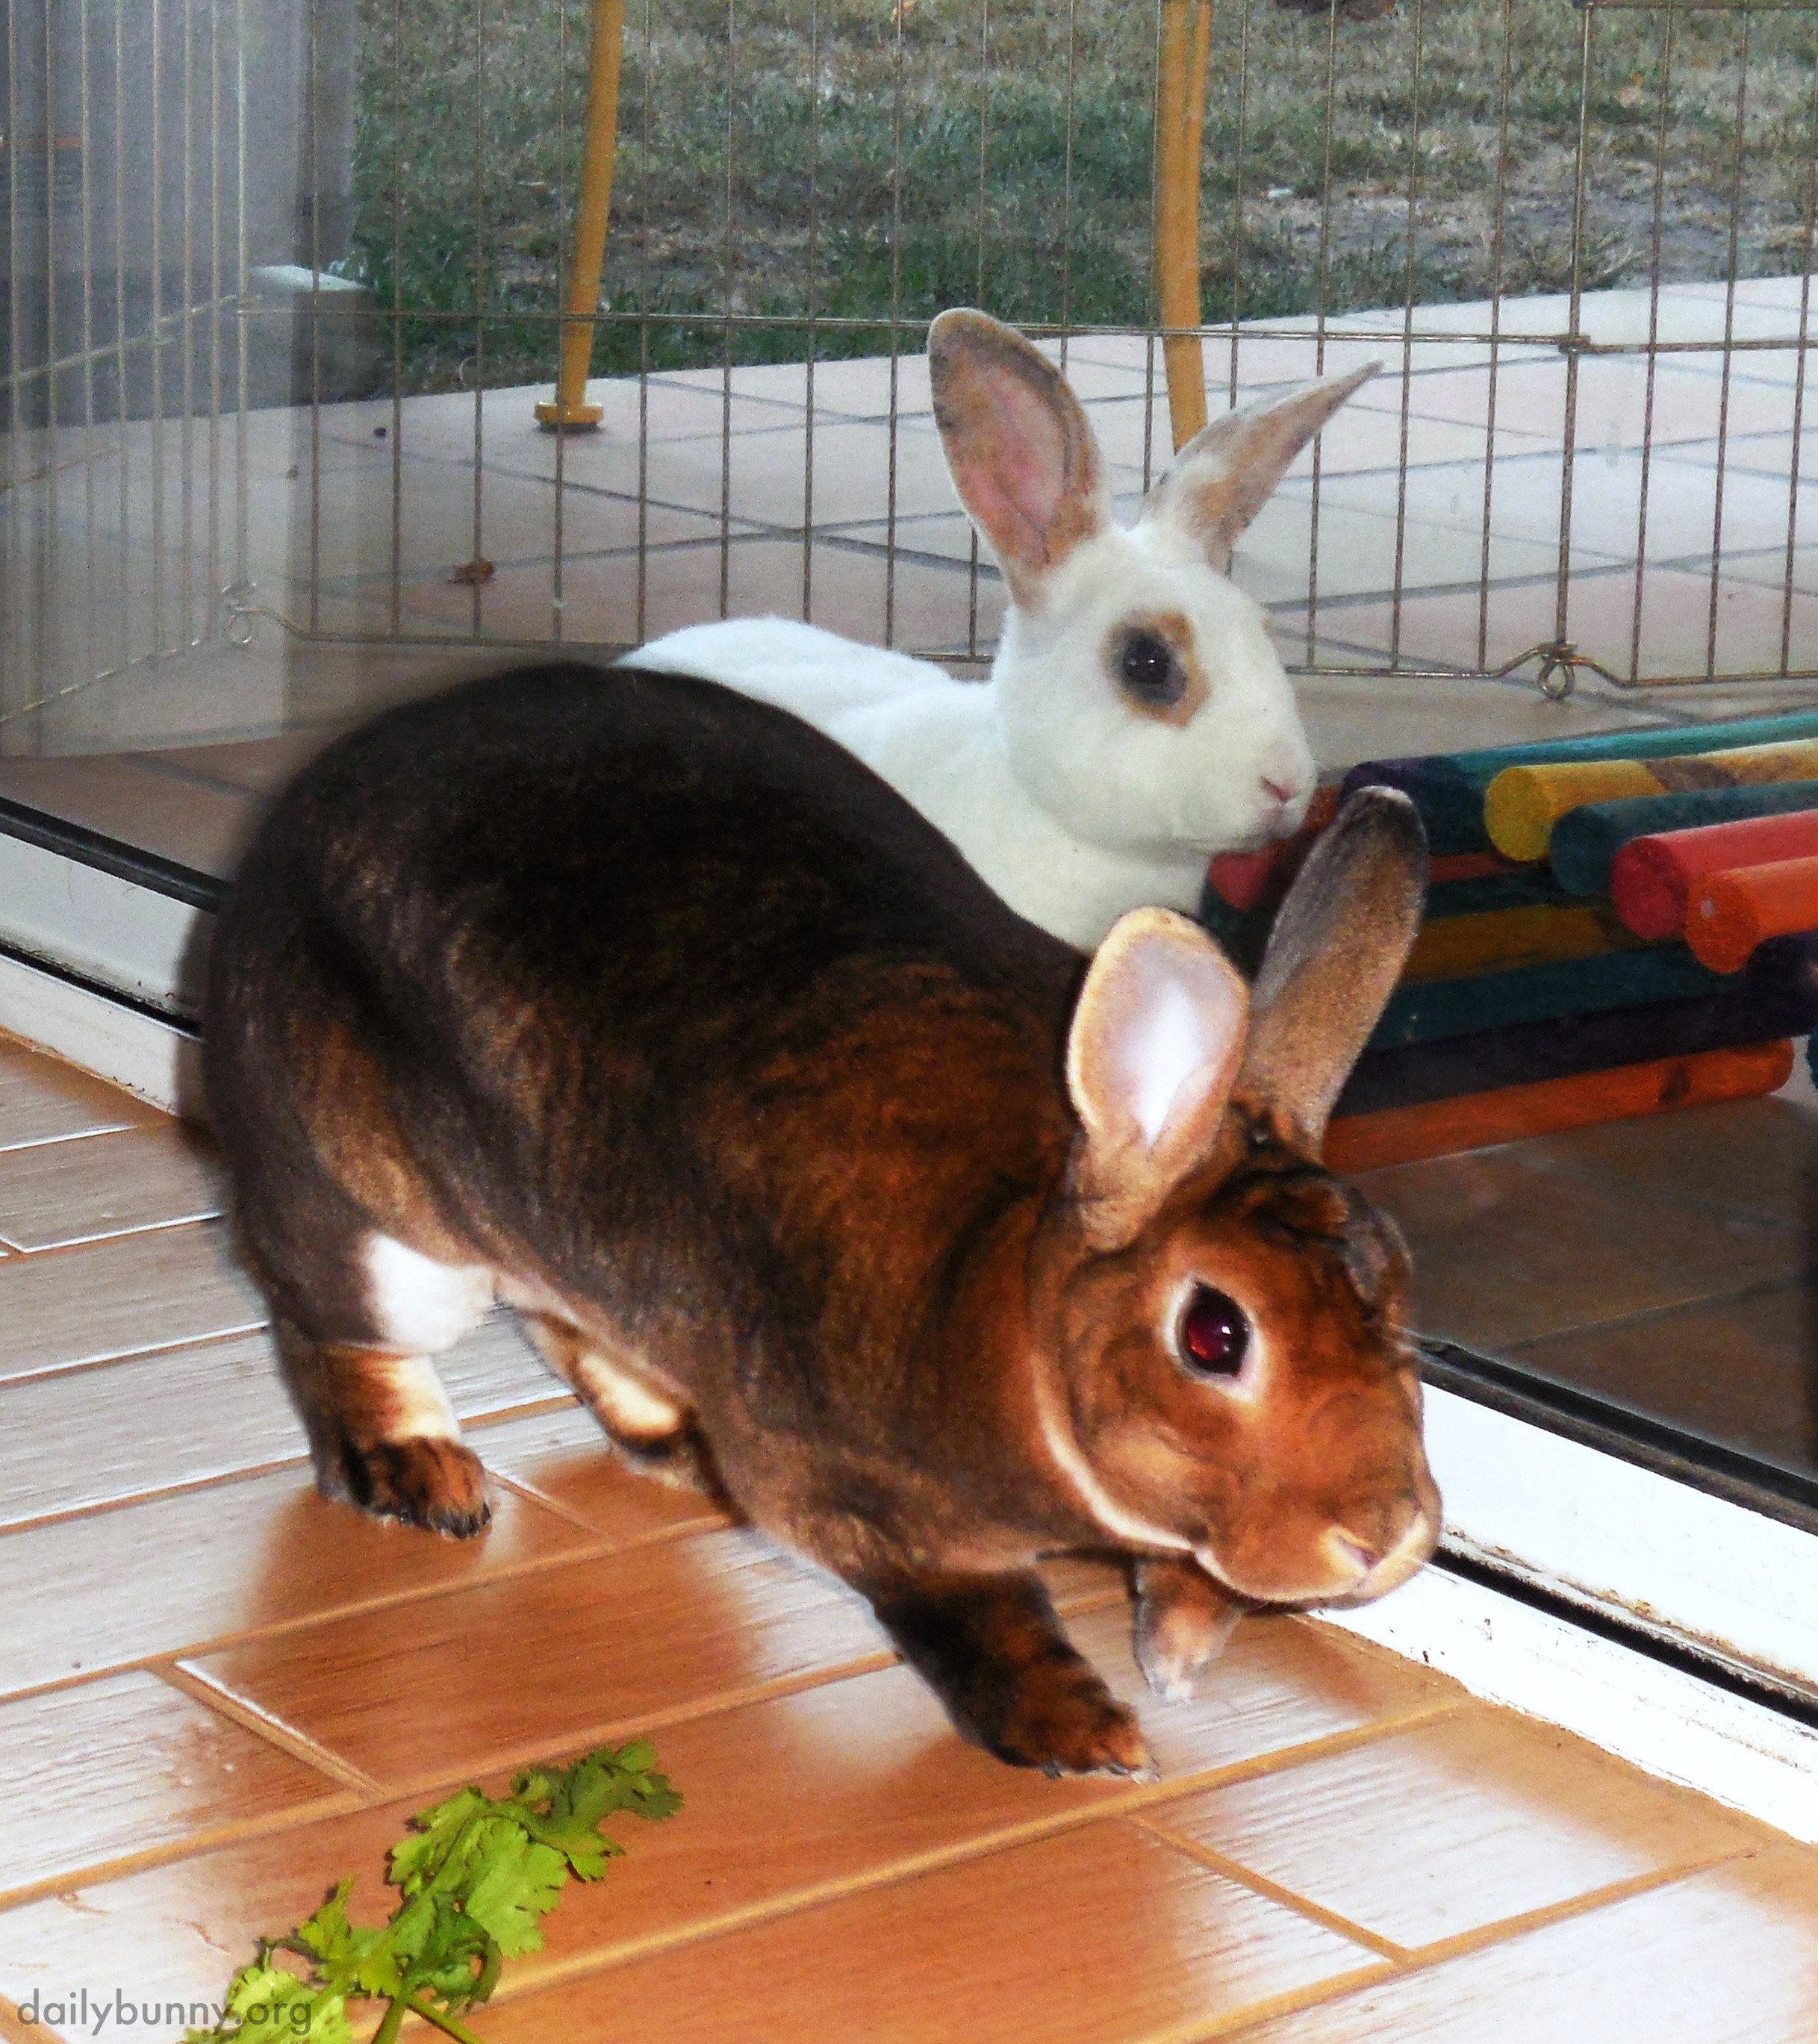 Bunny Burglars Quietly Creep into the Kitchen for a Vegetable Robbery